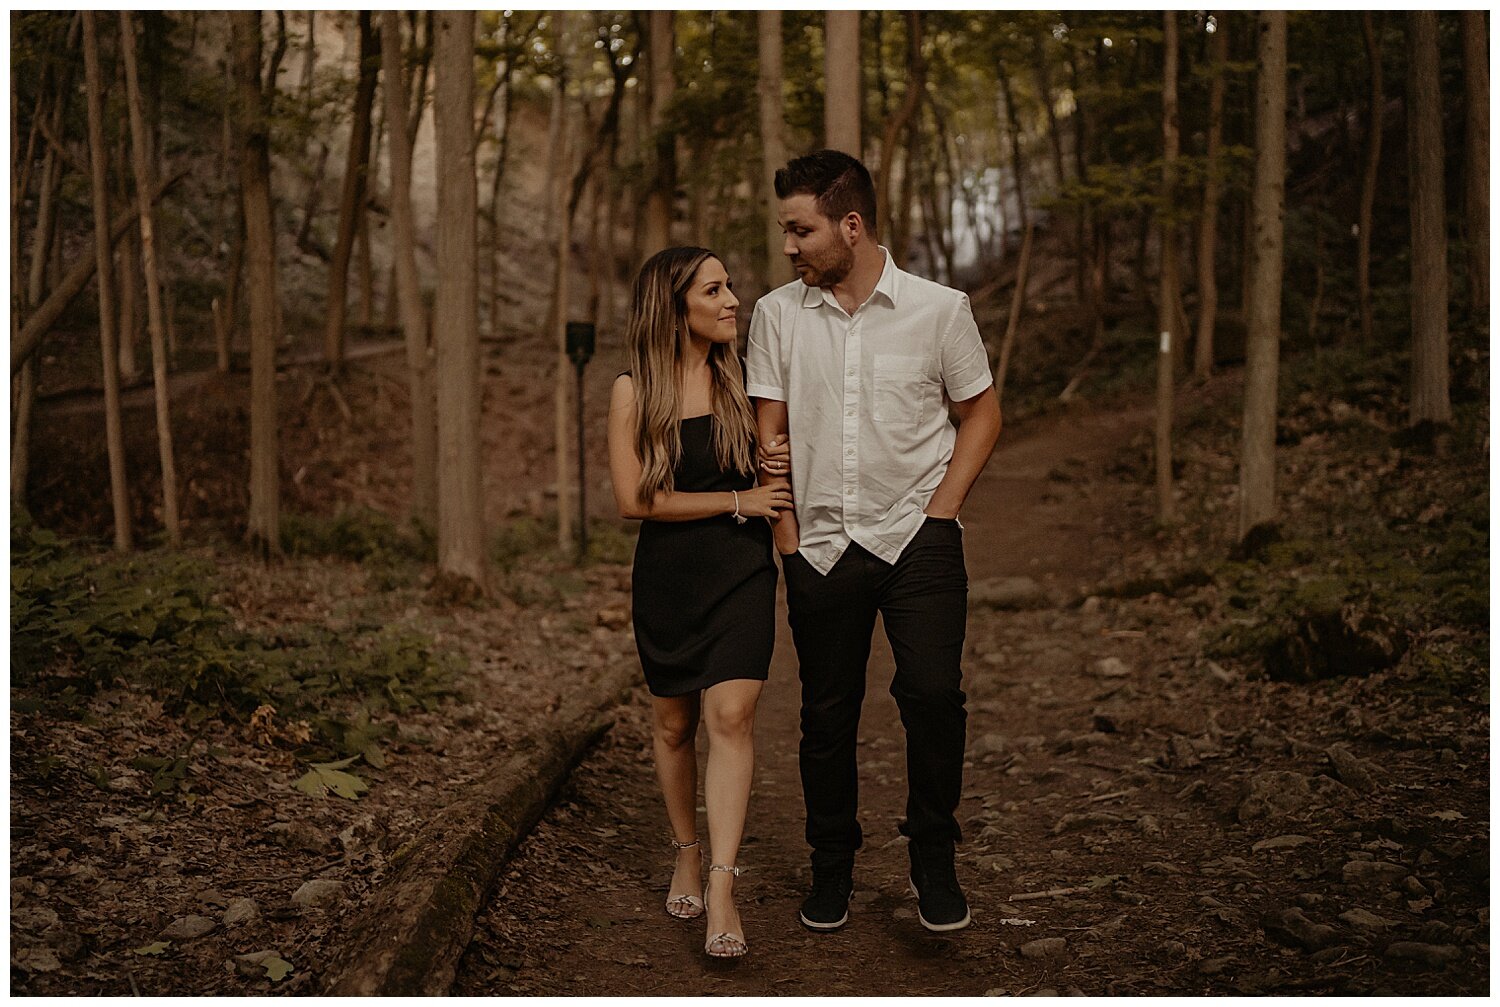 Cotton_Factory_And_Waterfall_Engagement_Session_Hamilton_Ontario_Wedding_Photographer_0094.jpg